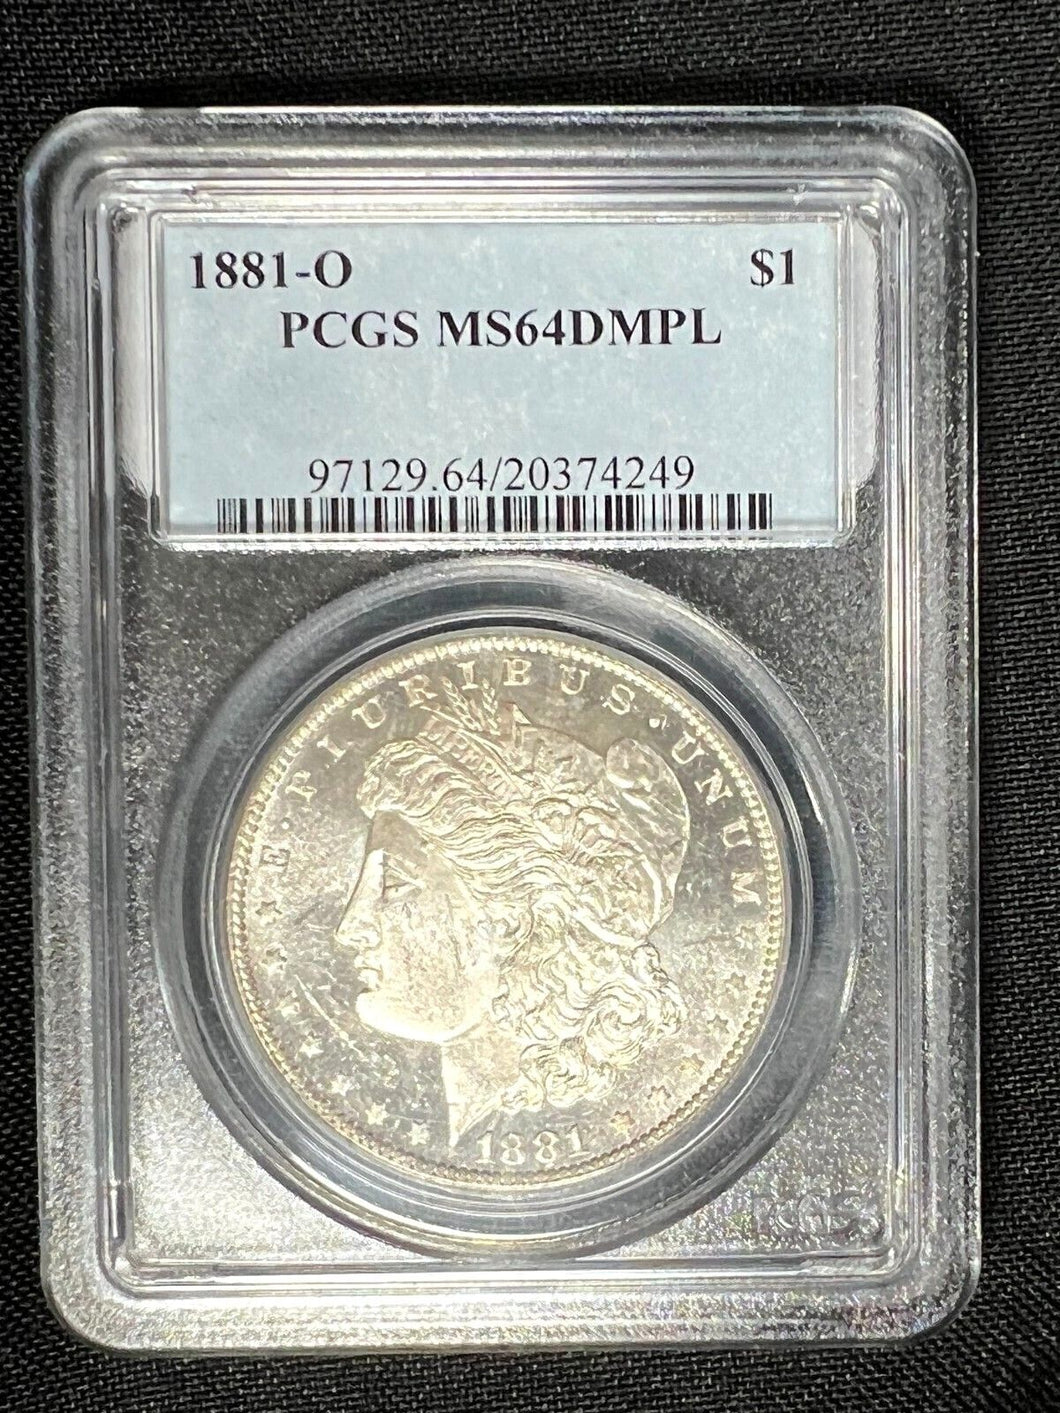 1881-O Morgan Silver Dollar PCGS MS64 DMPL (DPL) Deep Mirrors and Frosty Devices